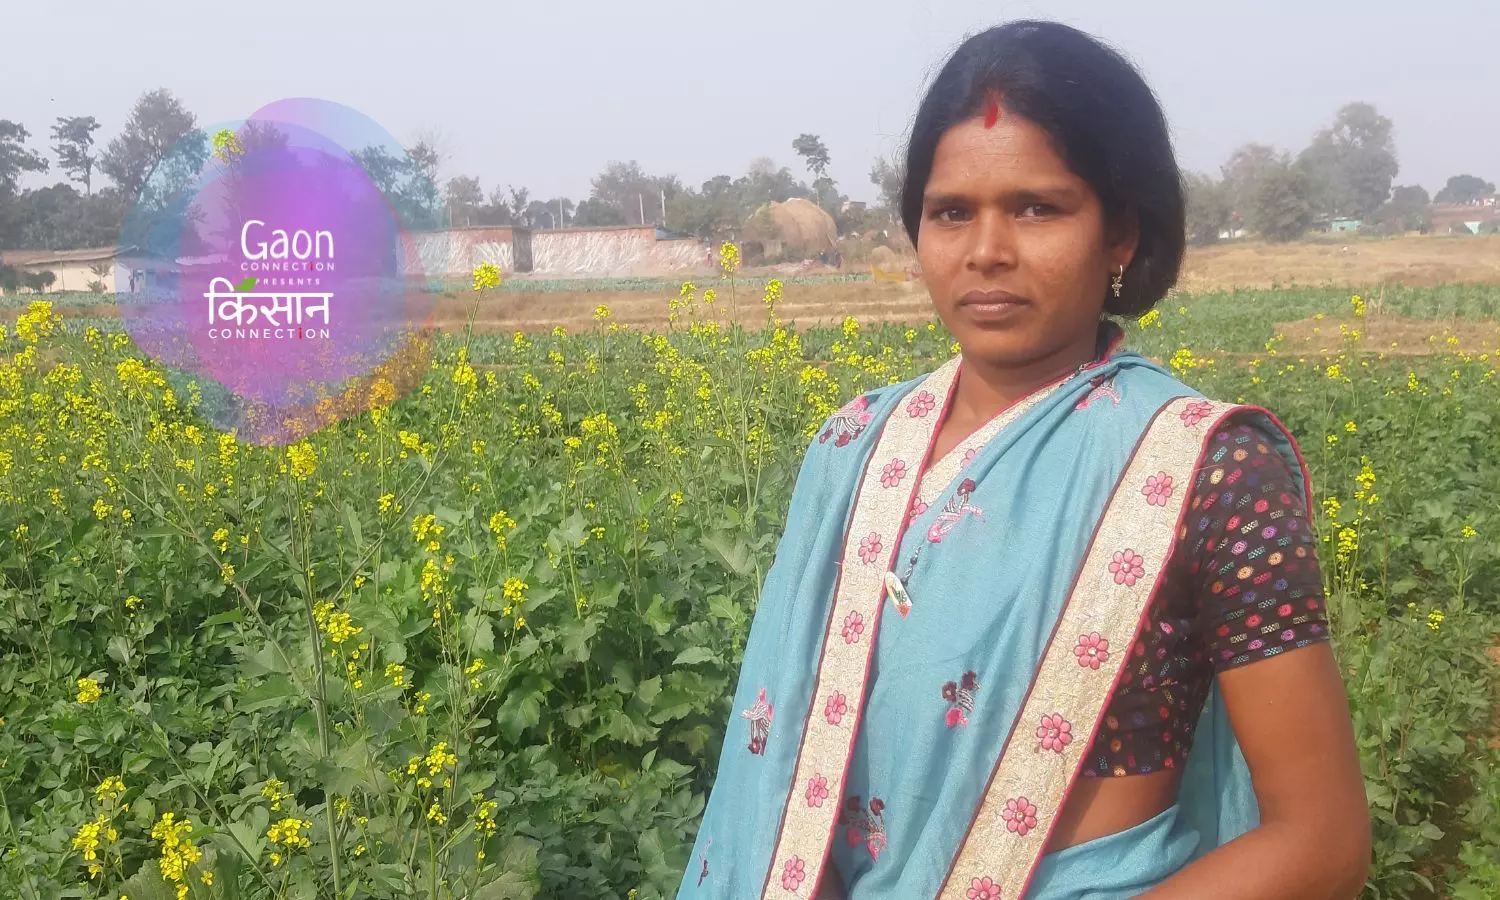 A 36-day online training in agriculture has transformed farmer Renu Devi’s life. Here’s how